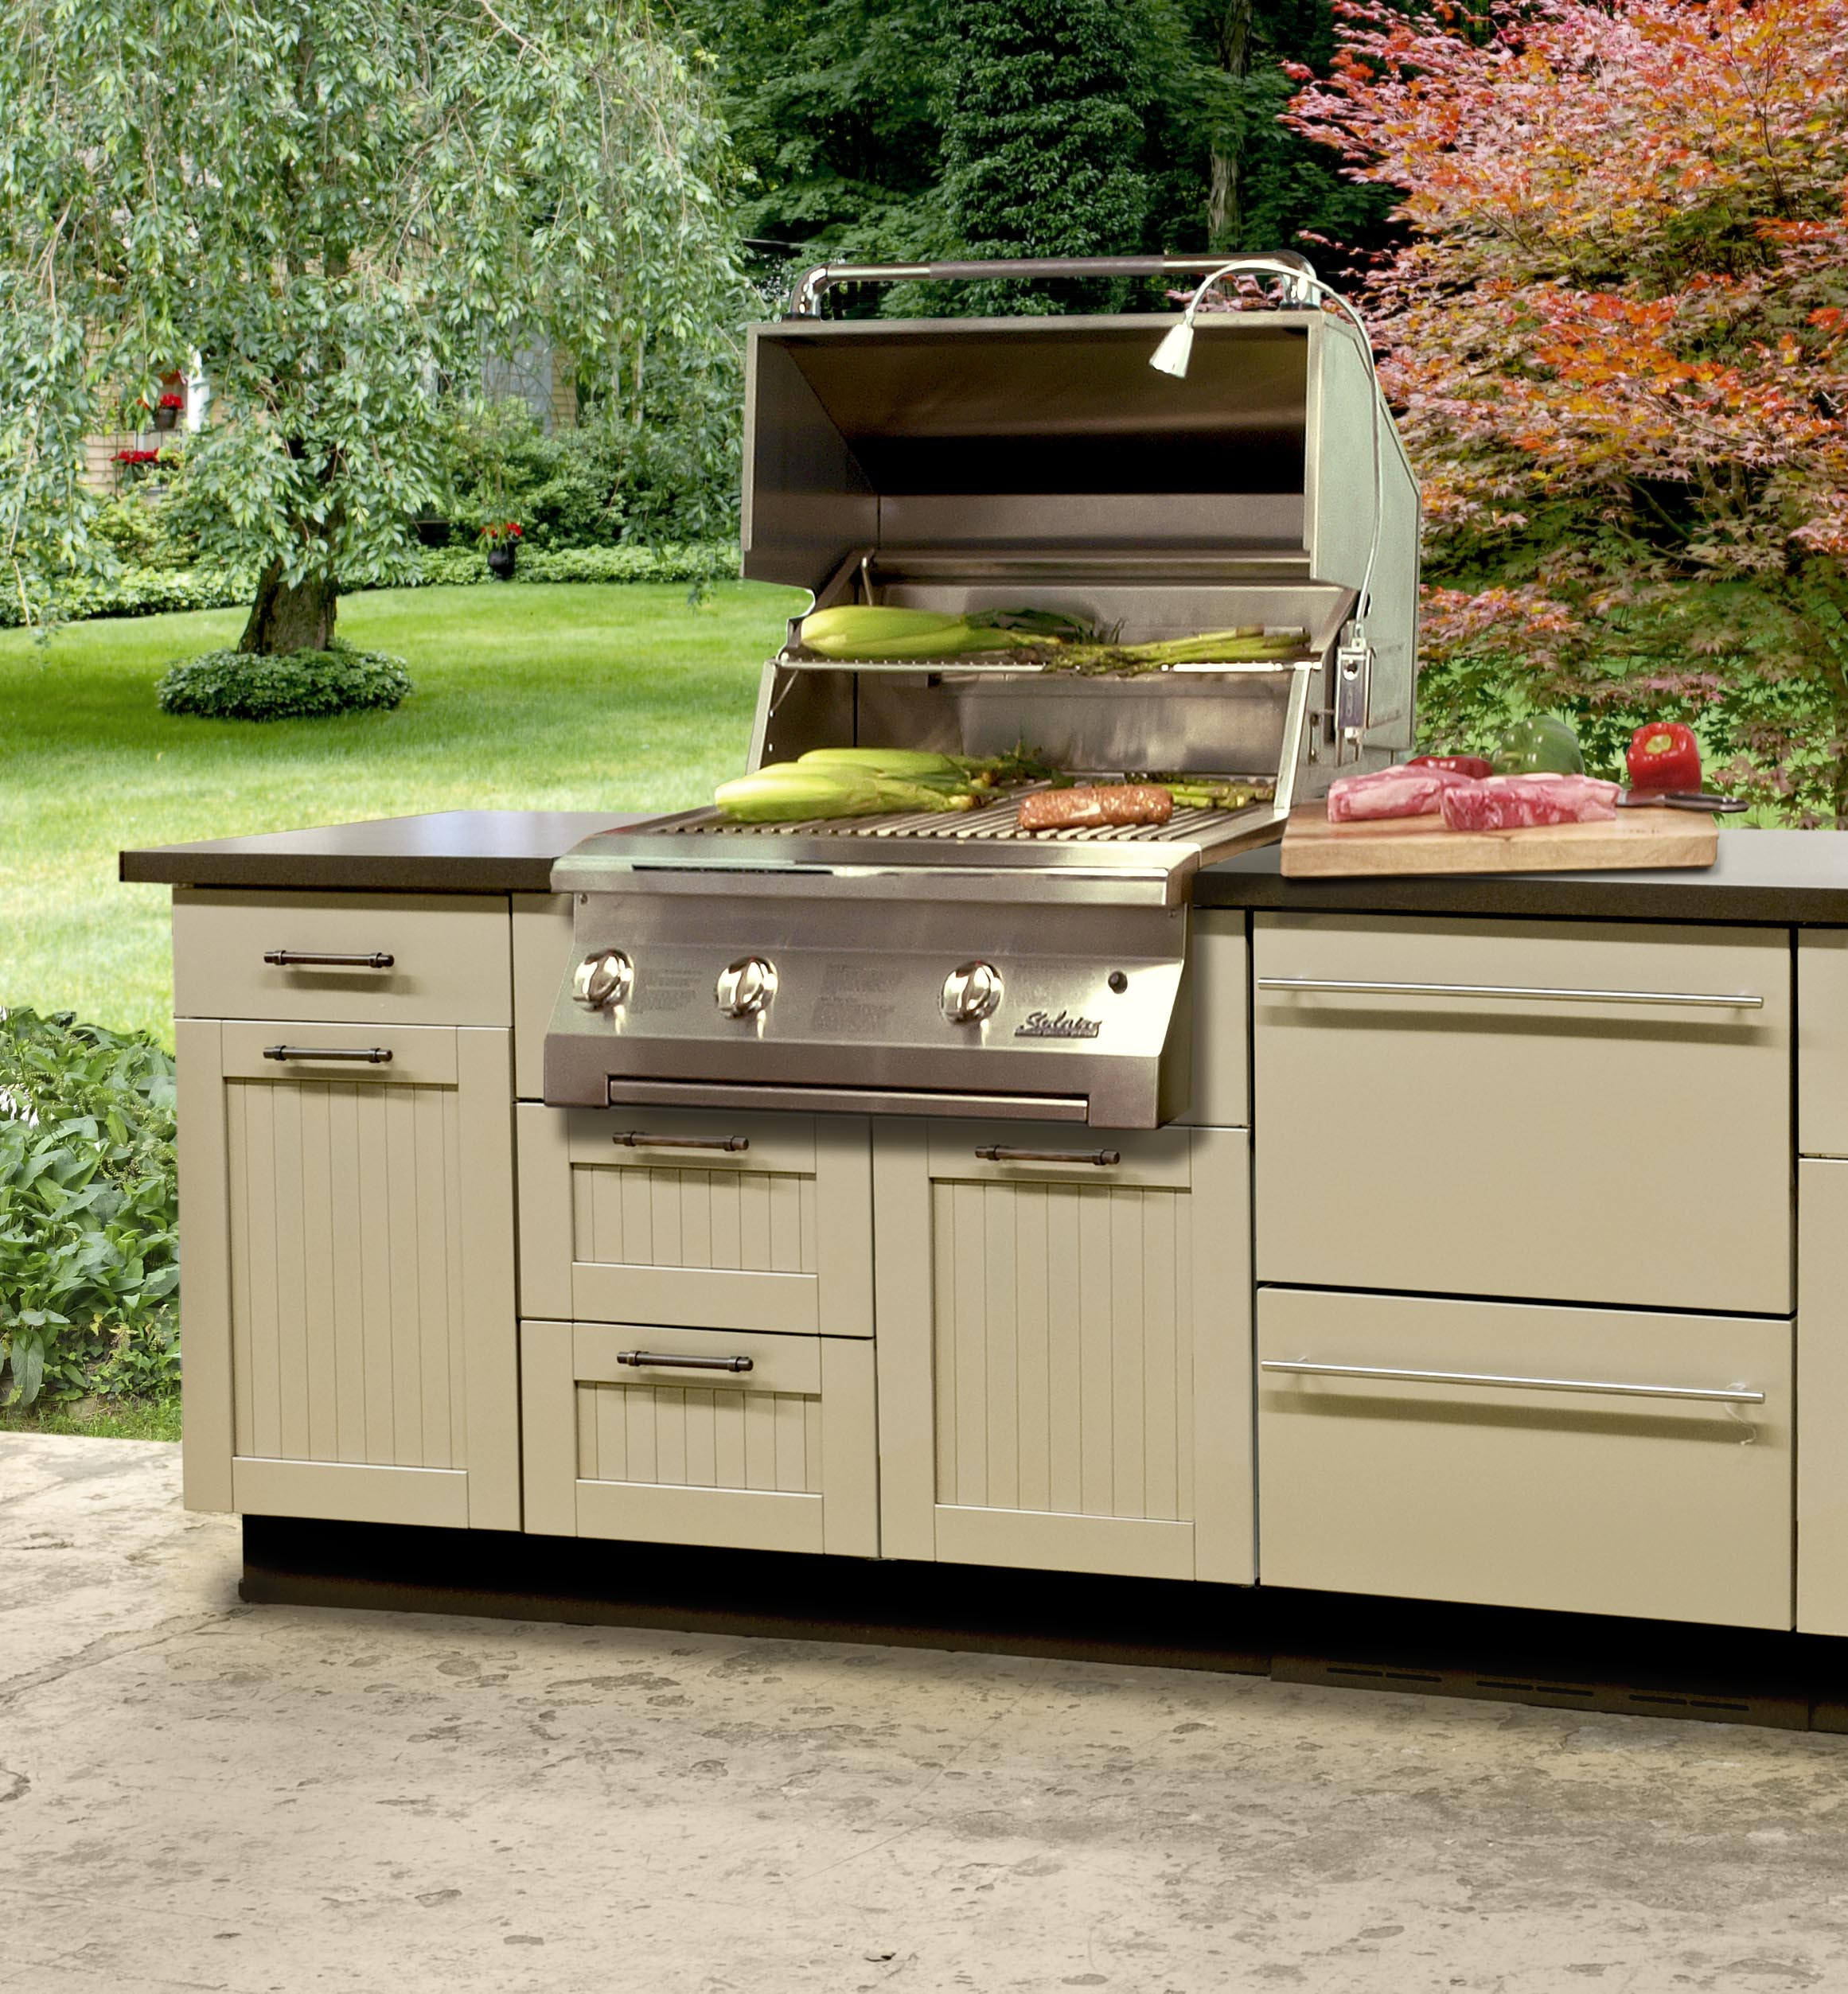 Outdoor Kitchen Lowes
 Outdoor kitchen lowes best suited to offer you top notch